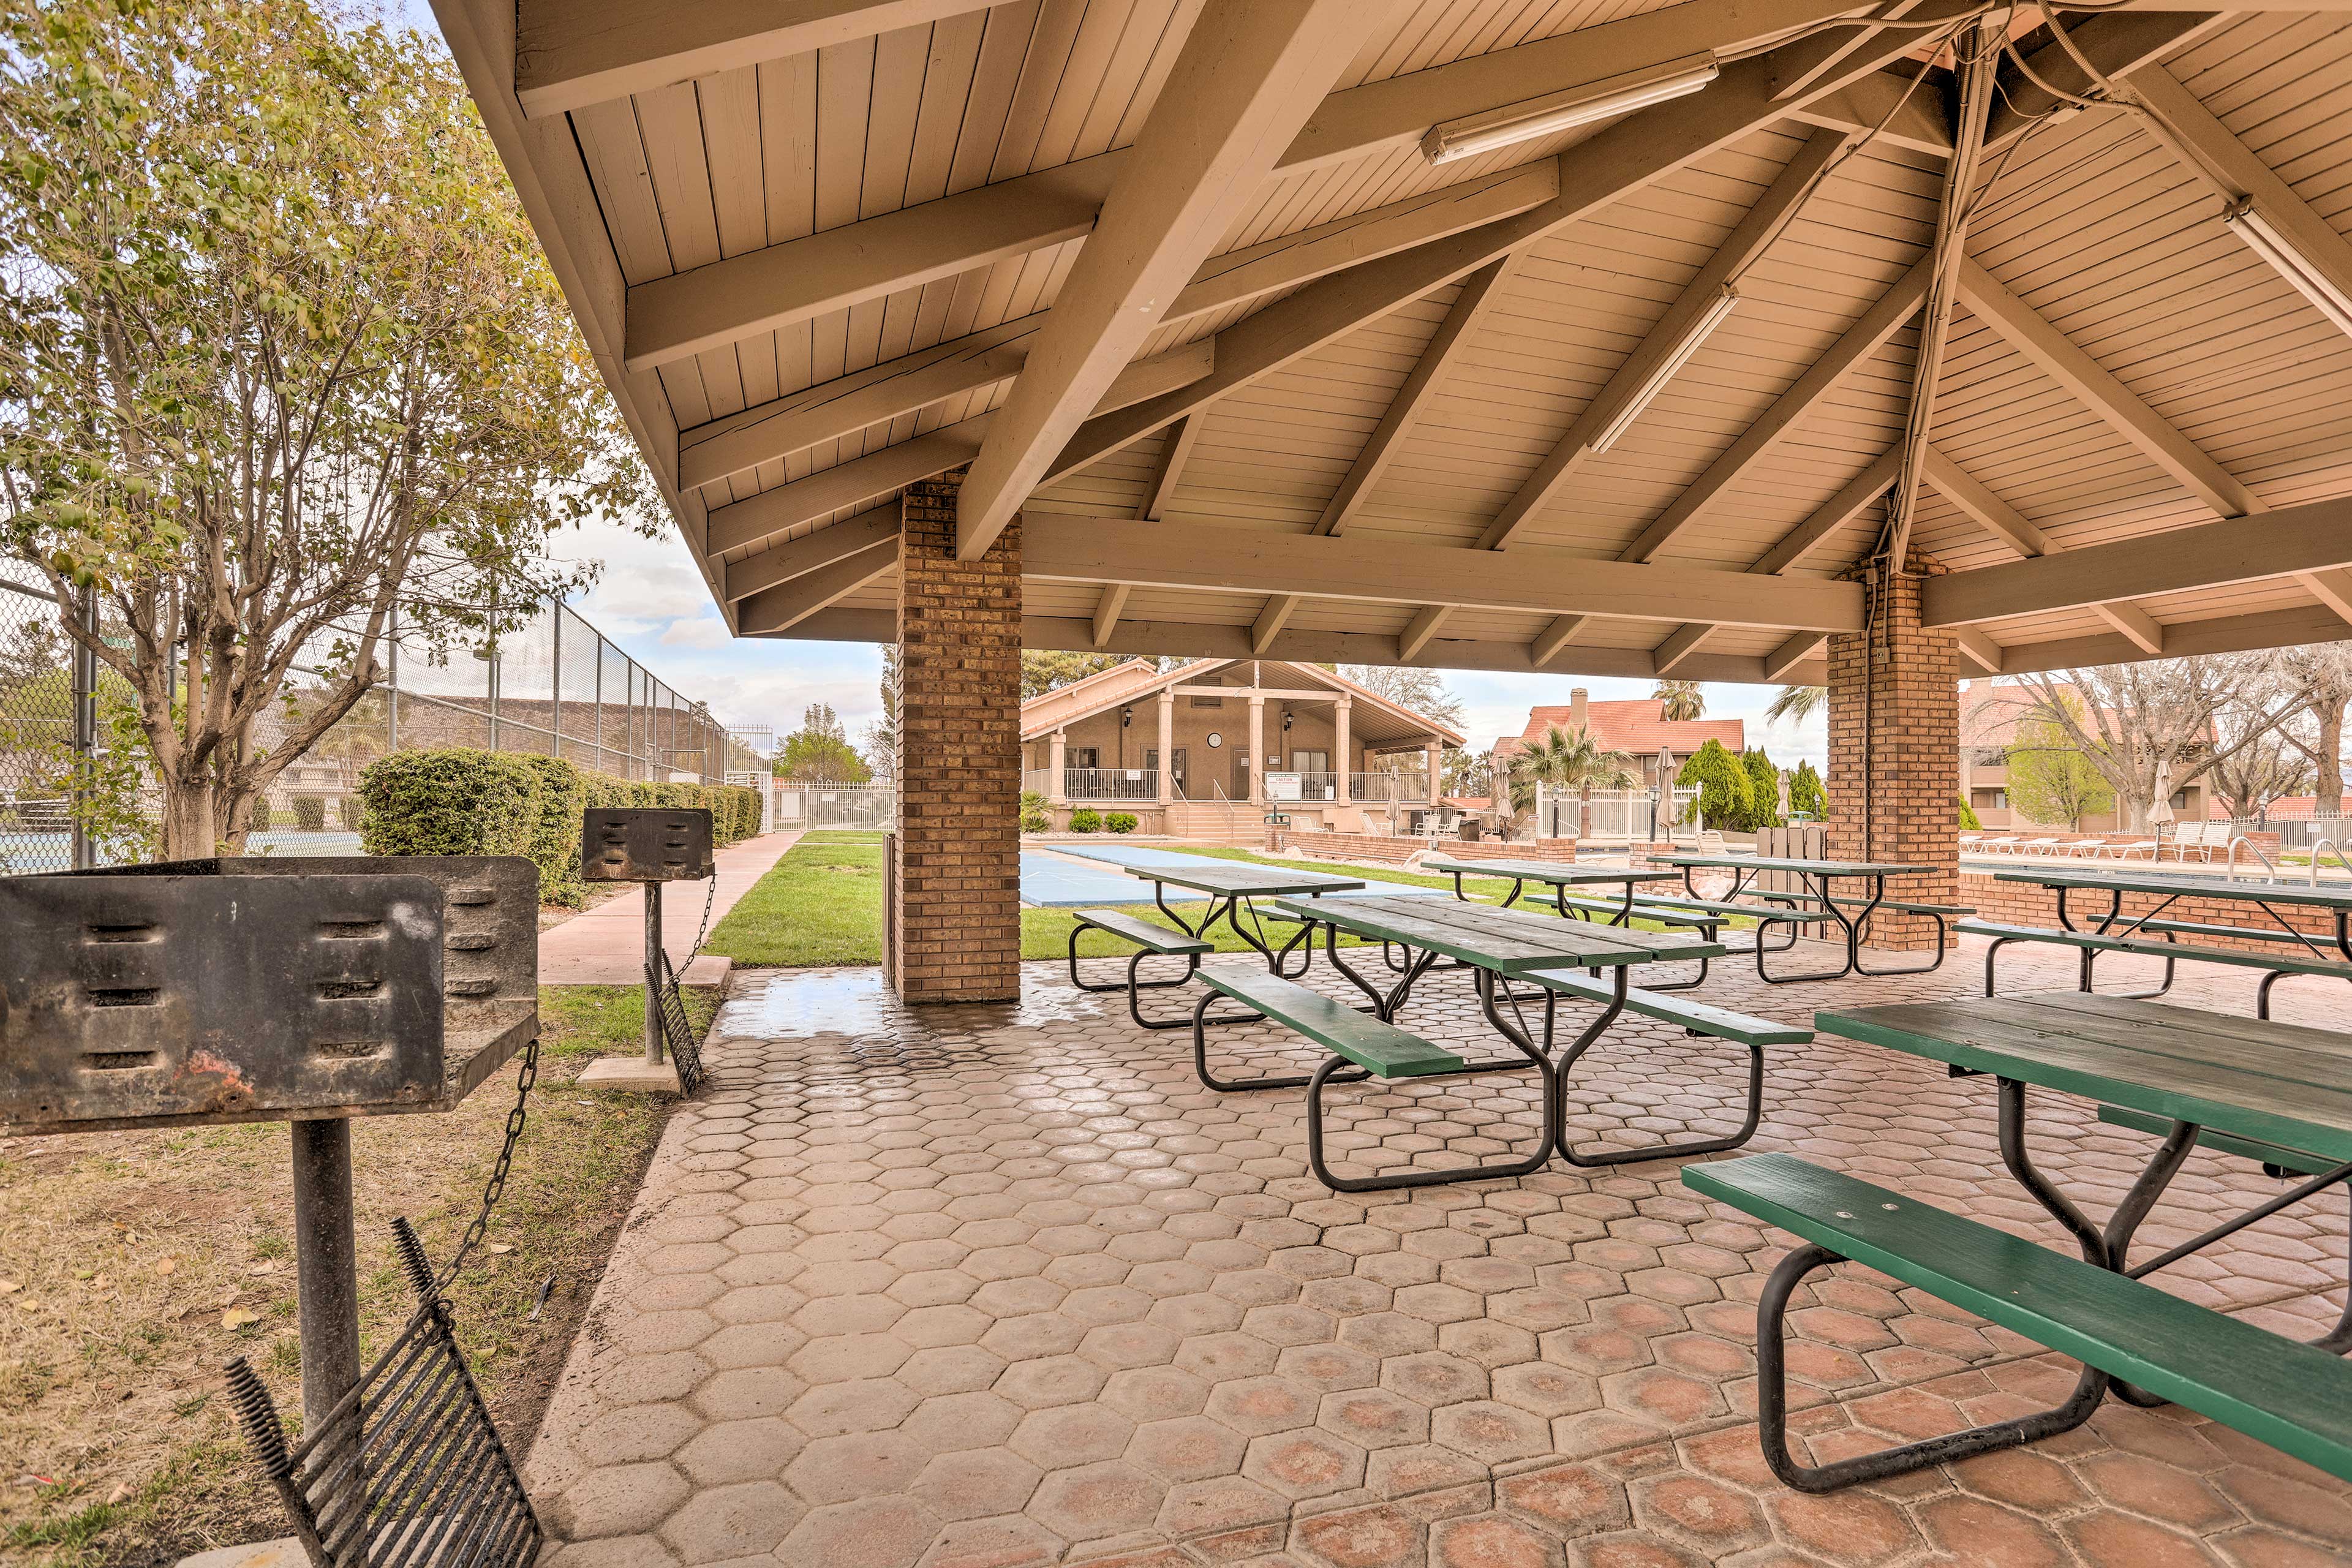 Community Dining Area & Charcoal Grills